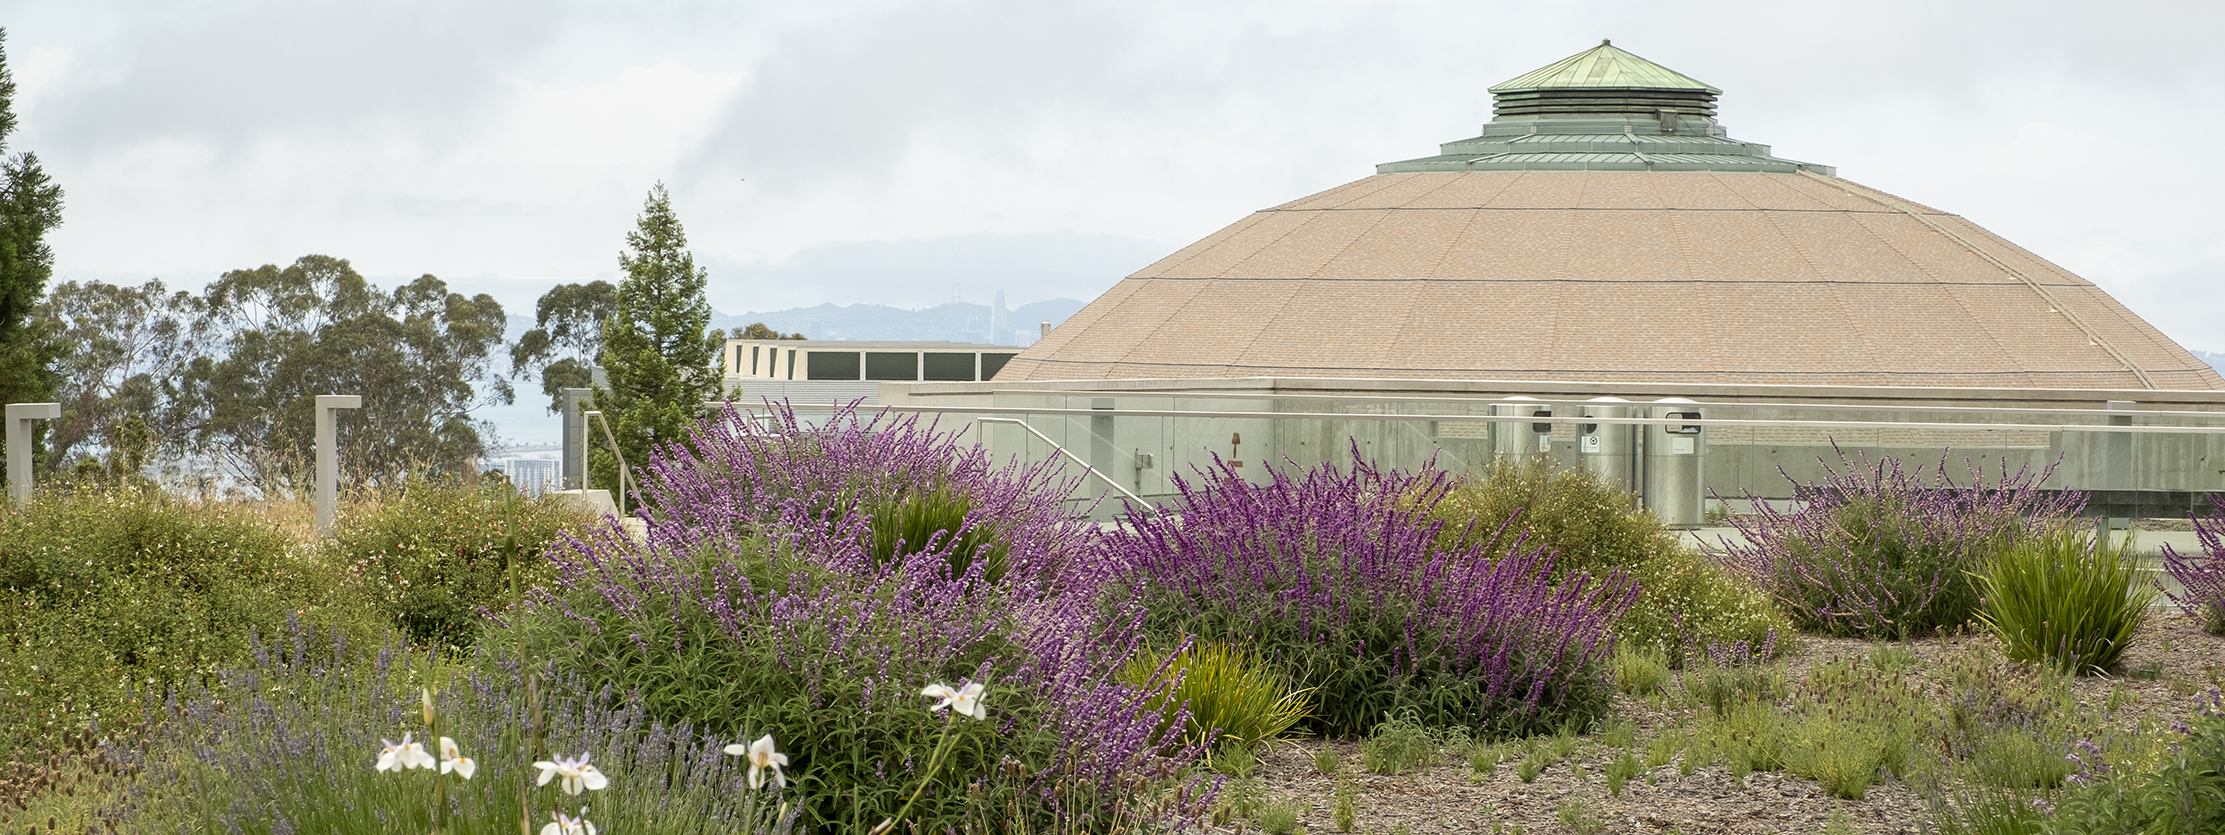 A round domed roof building with wild native plants in the foreground